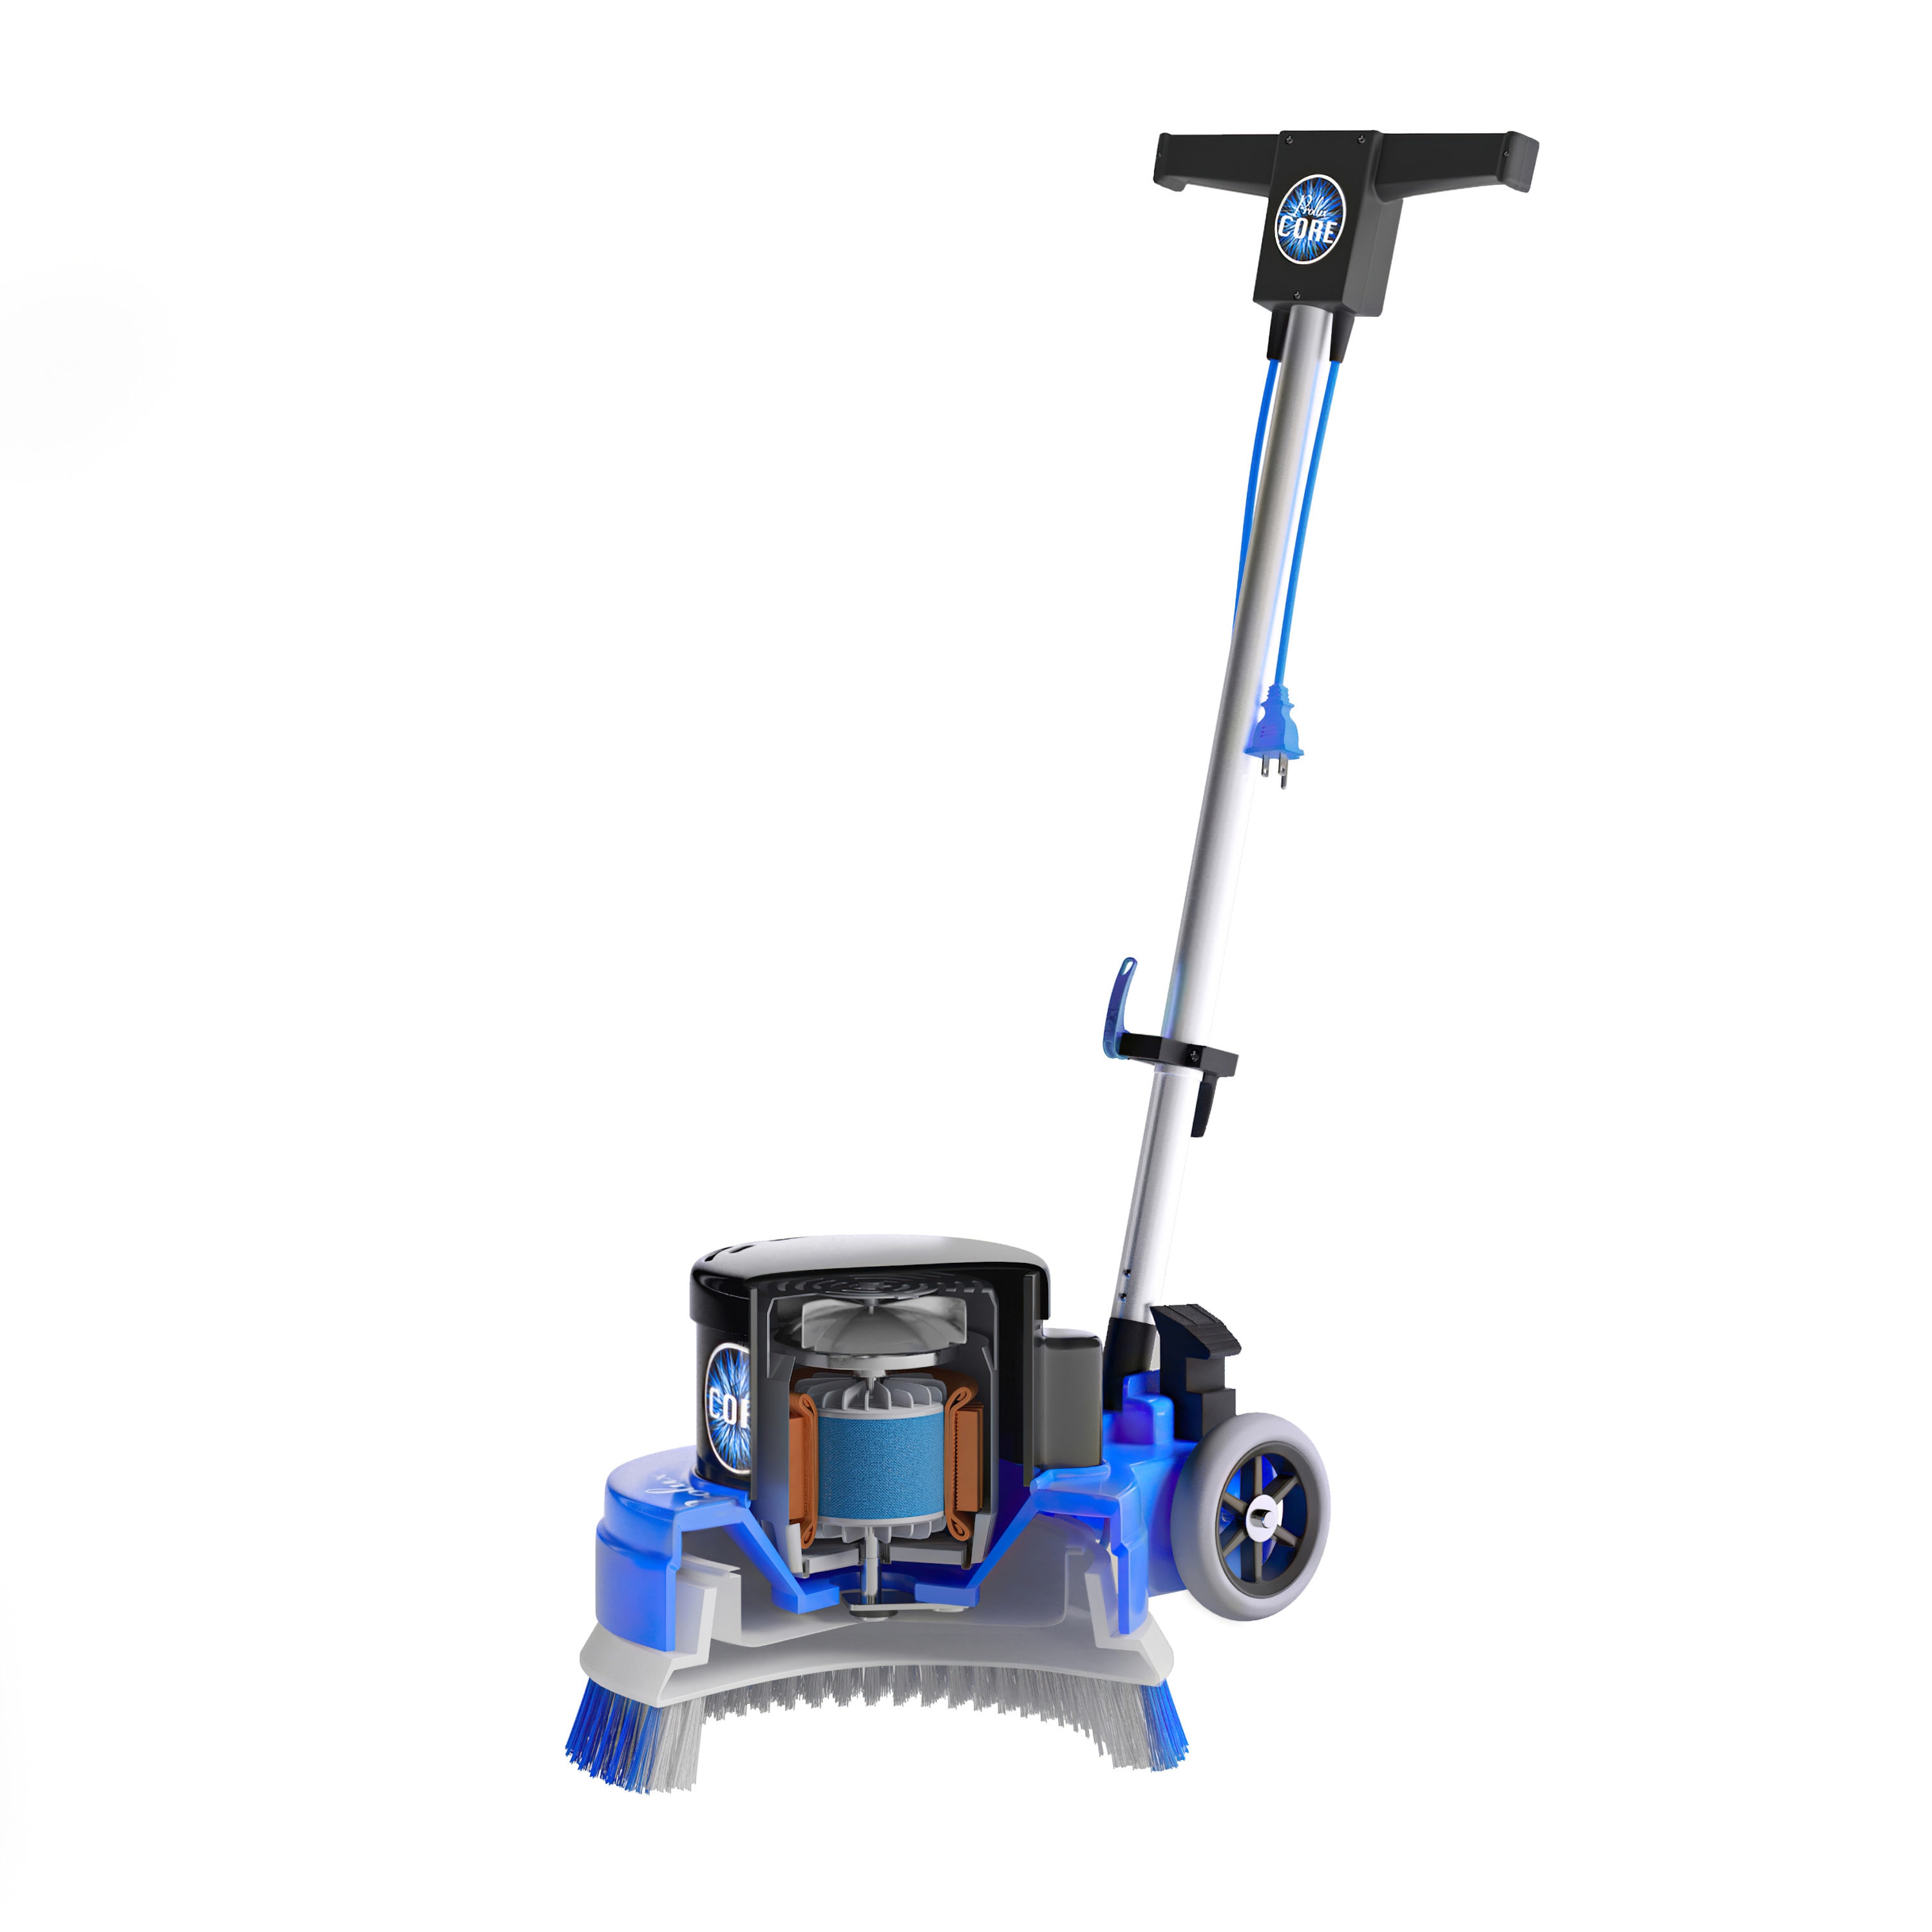 How to use a Floor scrubber for cleaning - Tikweld products and Services